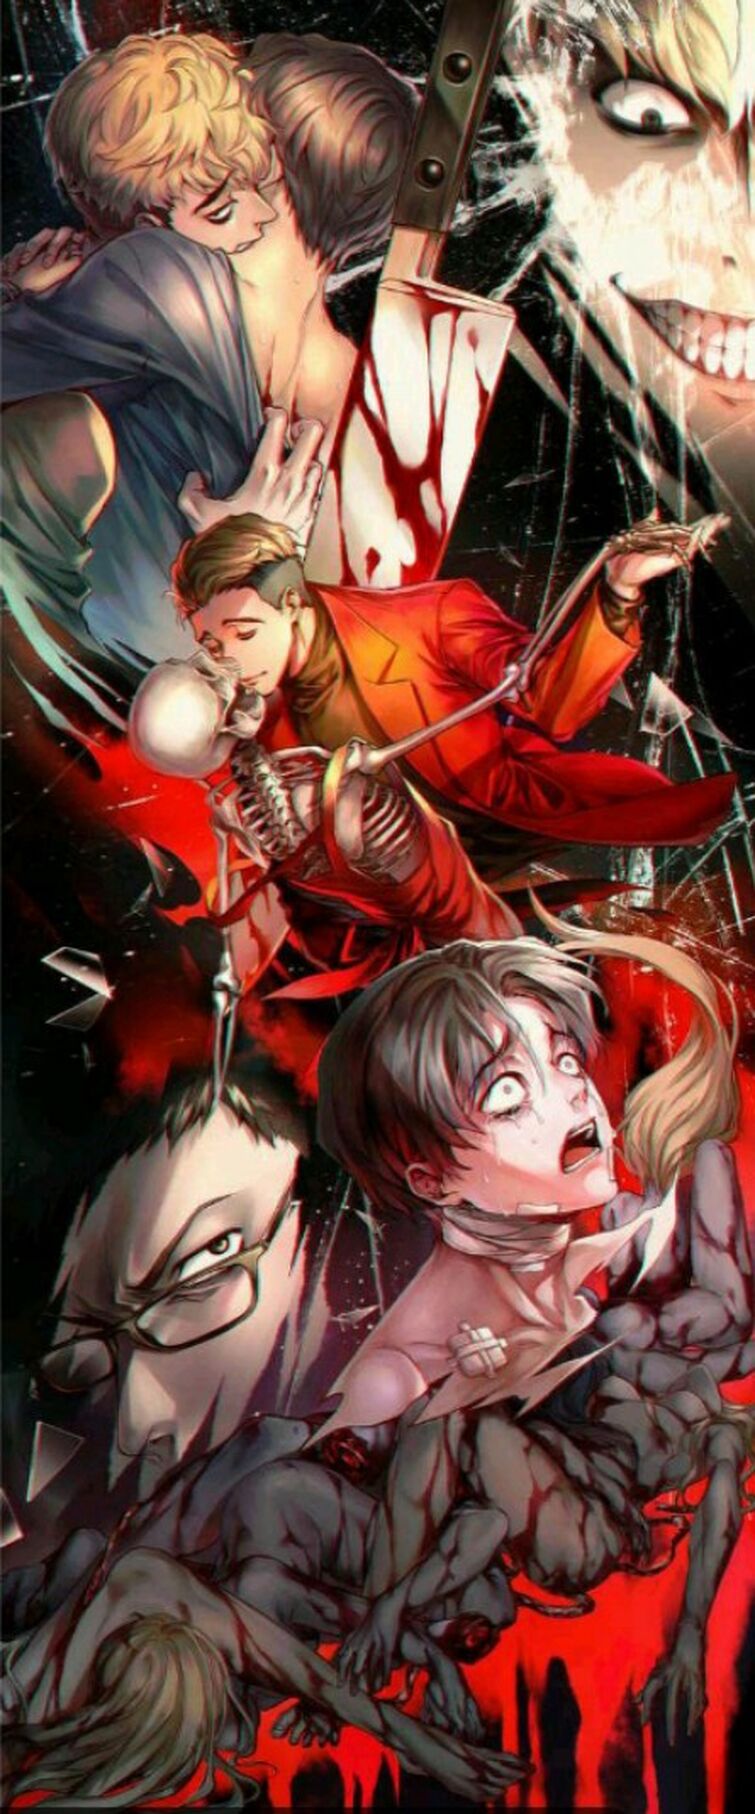 This is an offer made on the Request: Killing Stalking Manga